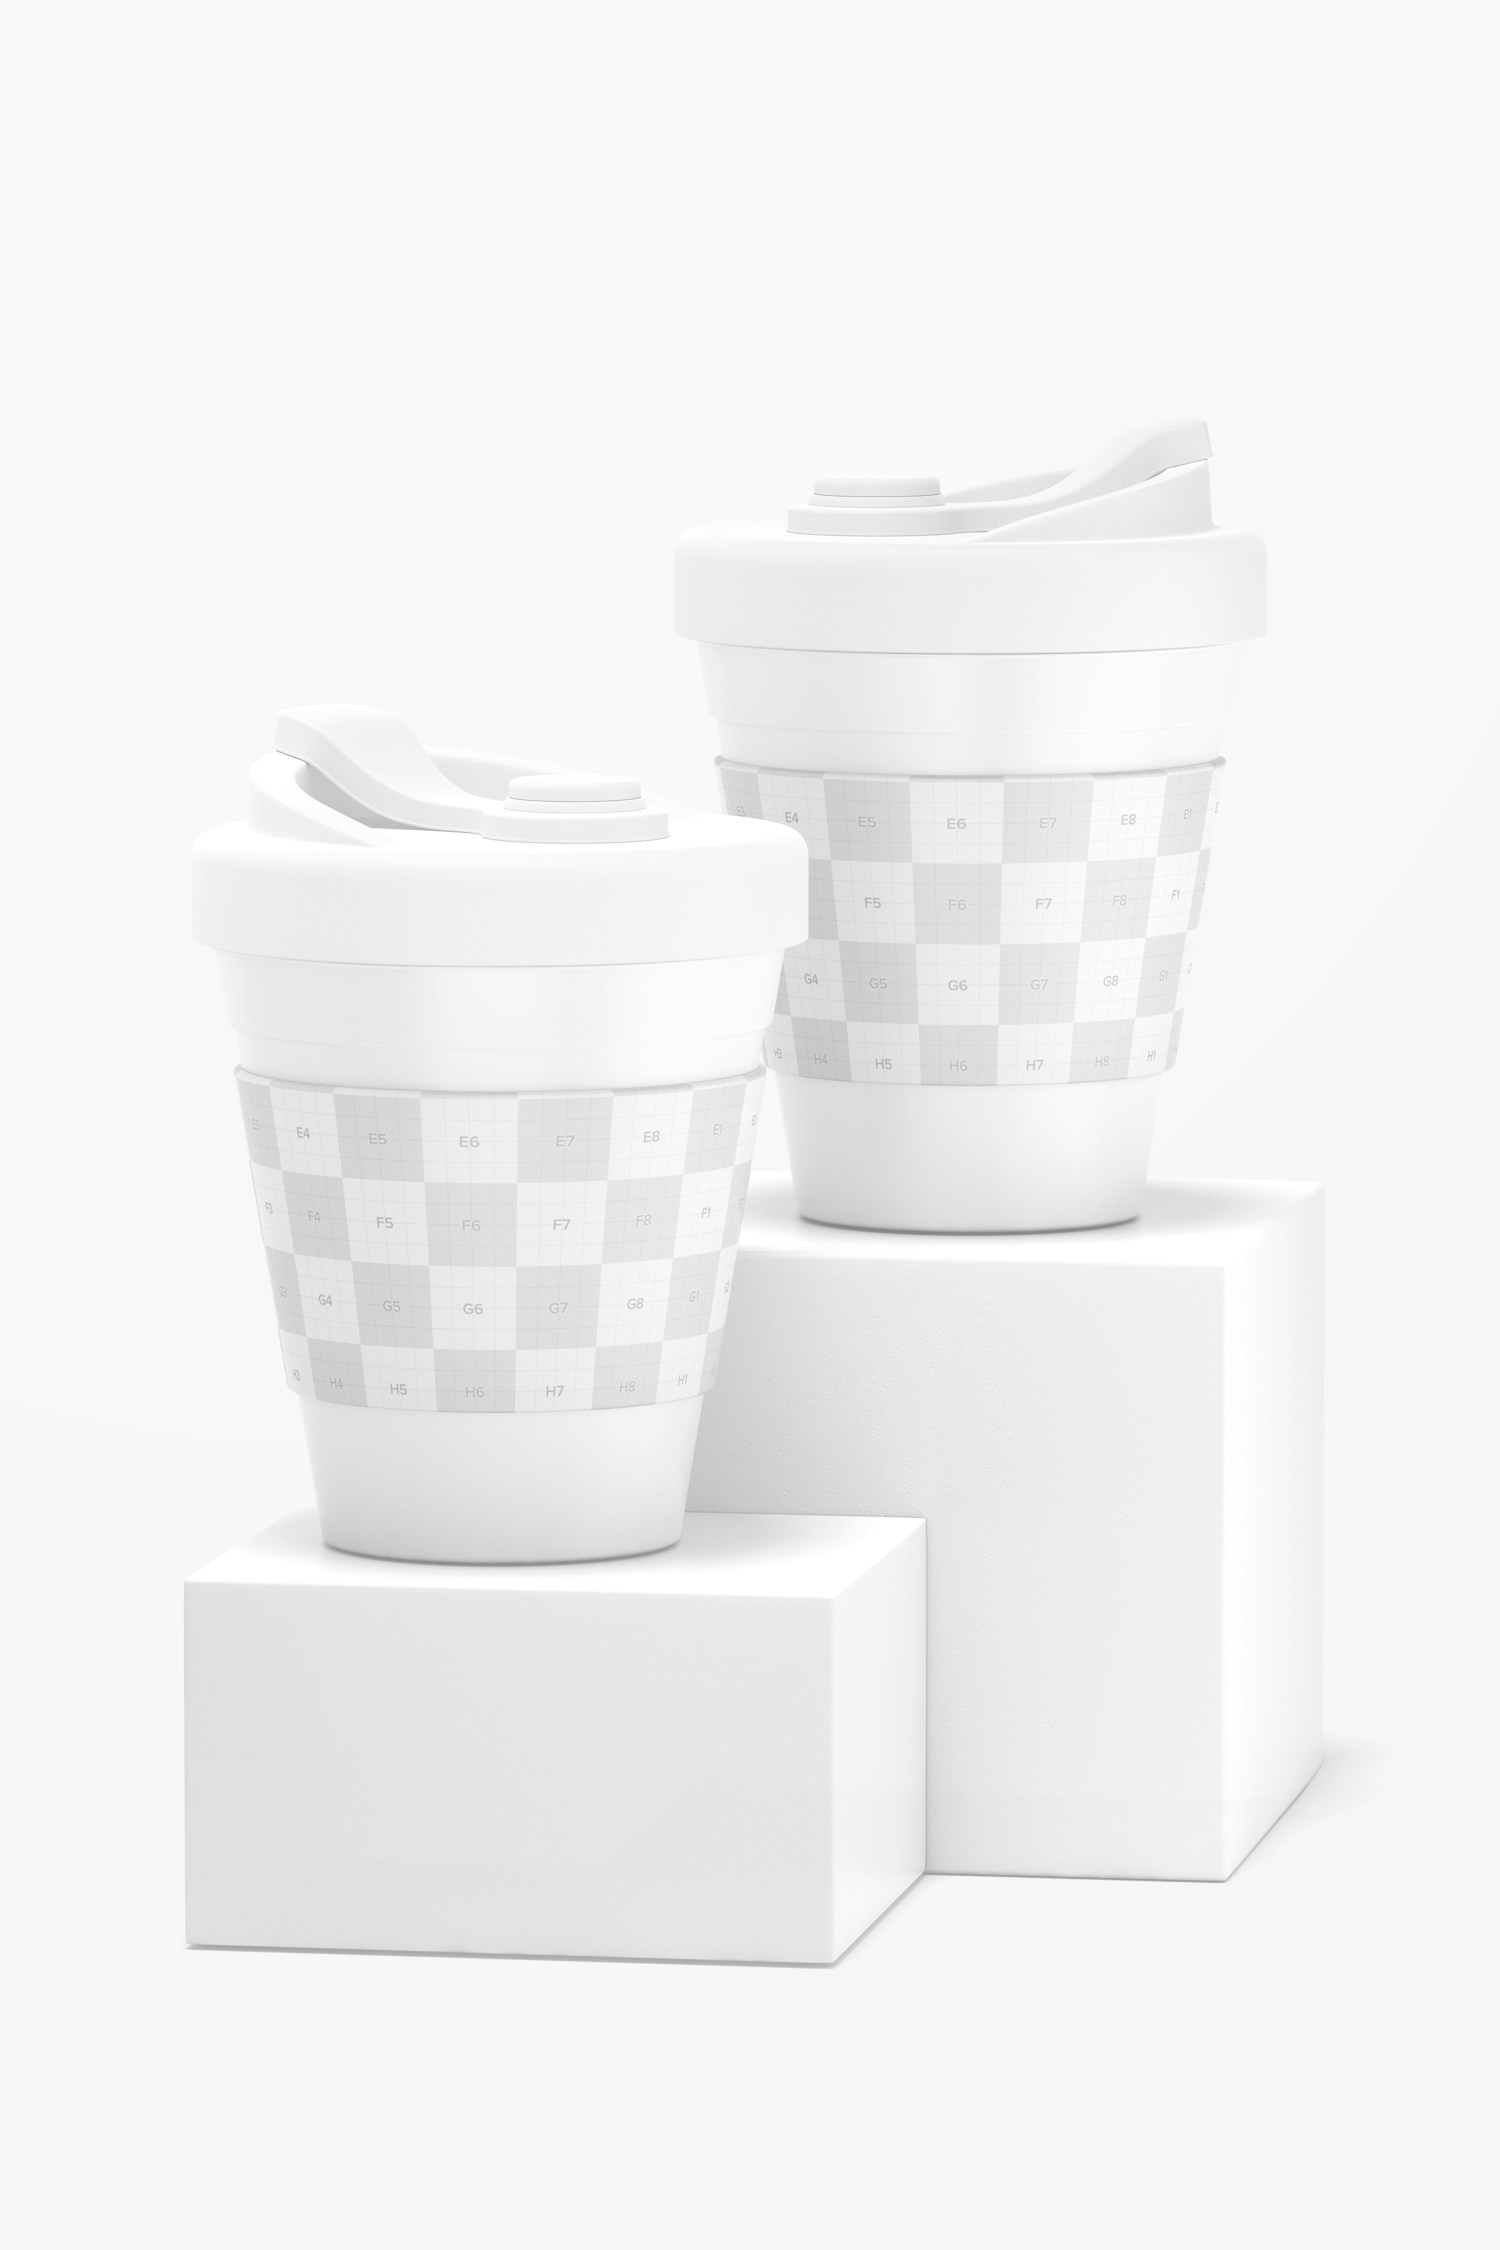 Coffee Cups with Lid Mockup, Front View